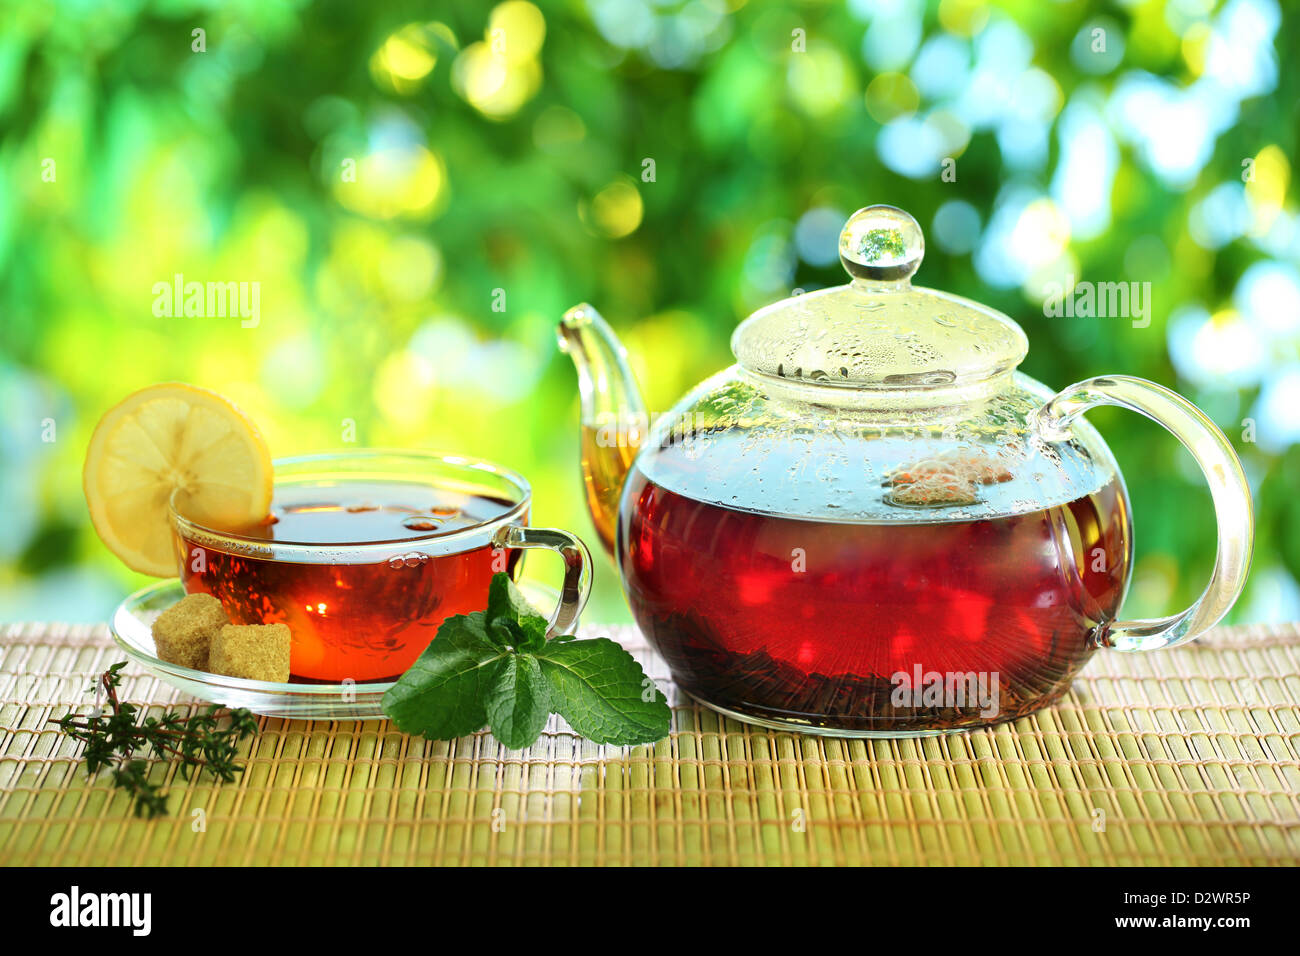 Cup of tea and teapot on a blurred background of nature. Stock Photo